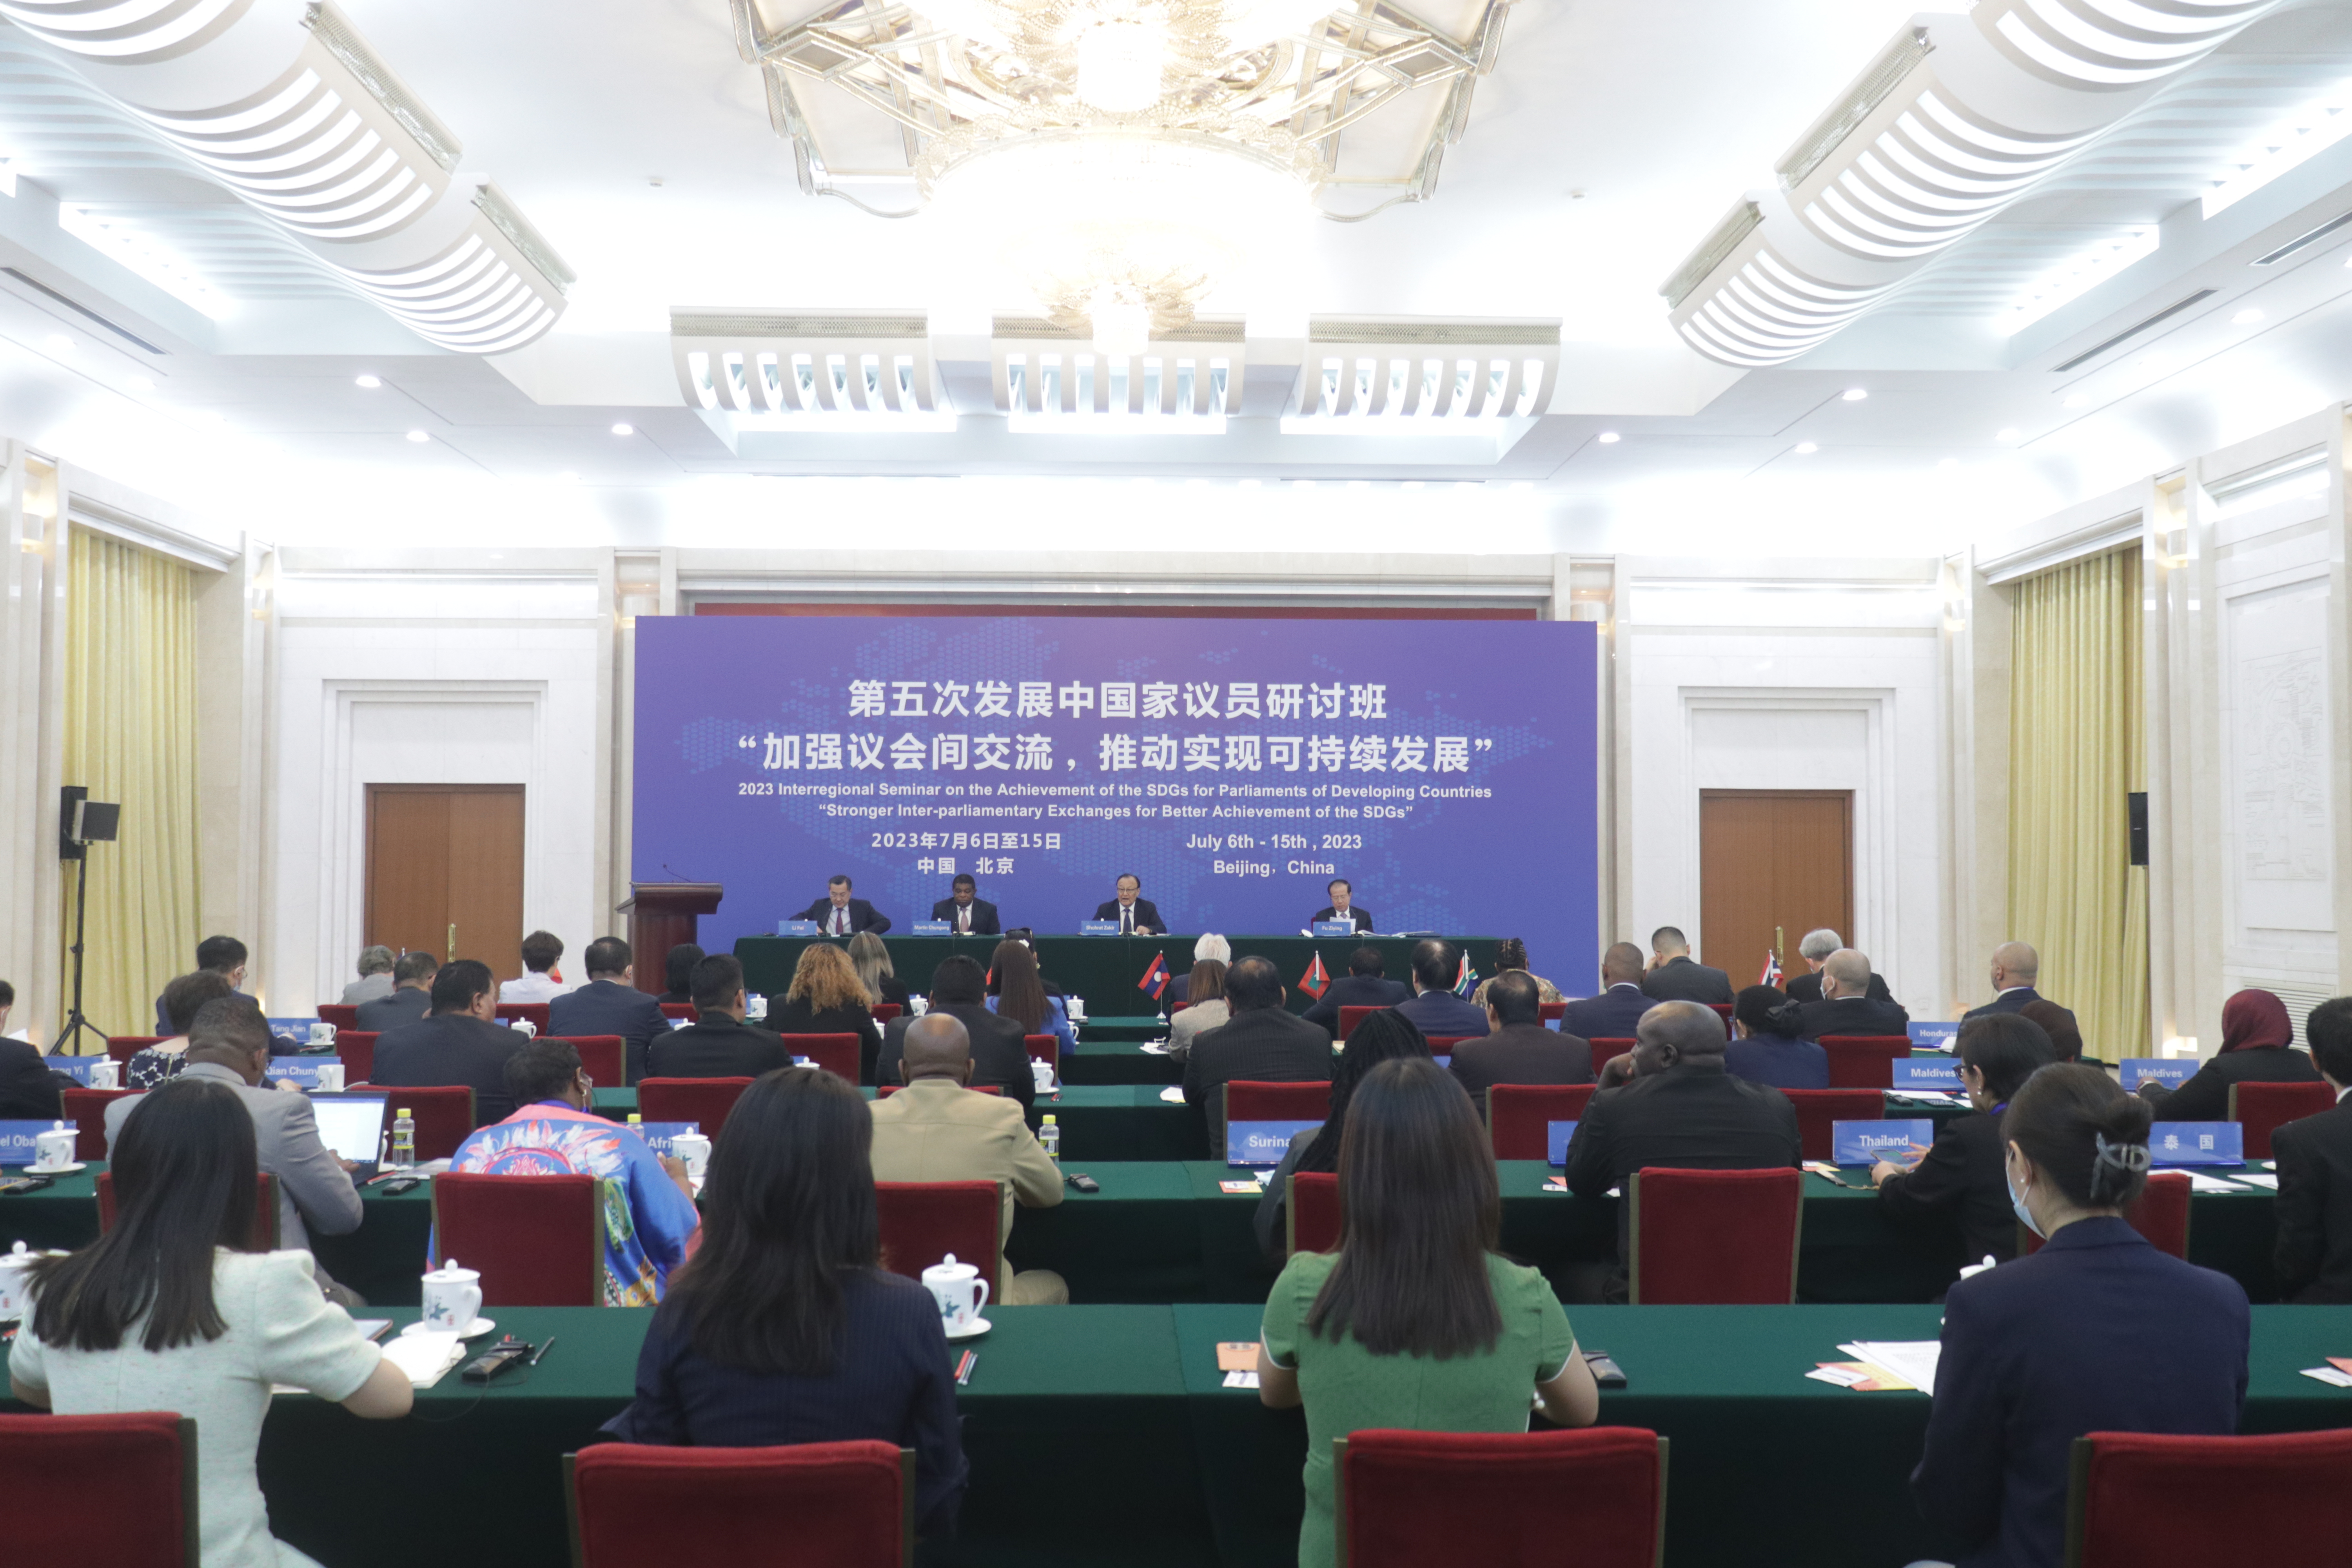 2023 Interregional Seminar on the Achievement of the SDGs for Parliaments of Developing Countries opens in Beijing